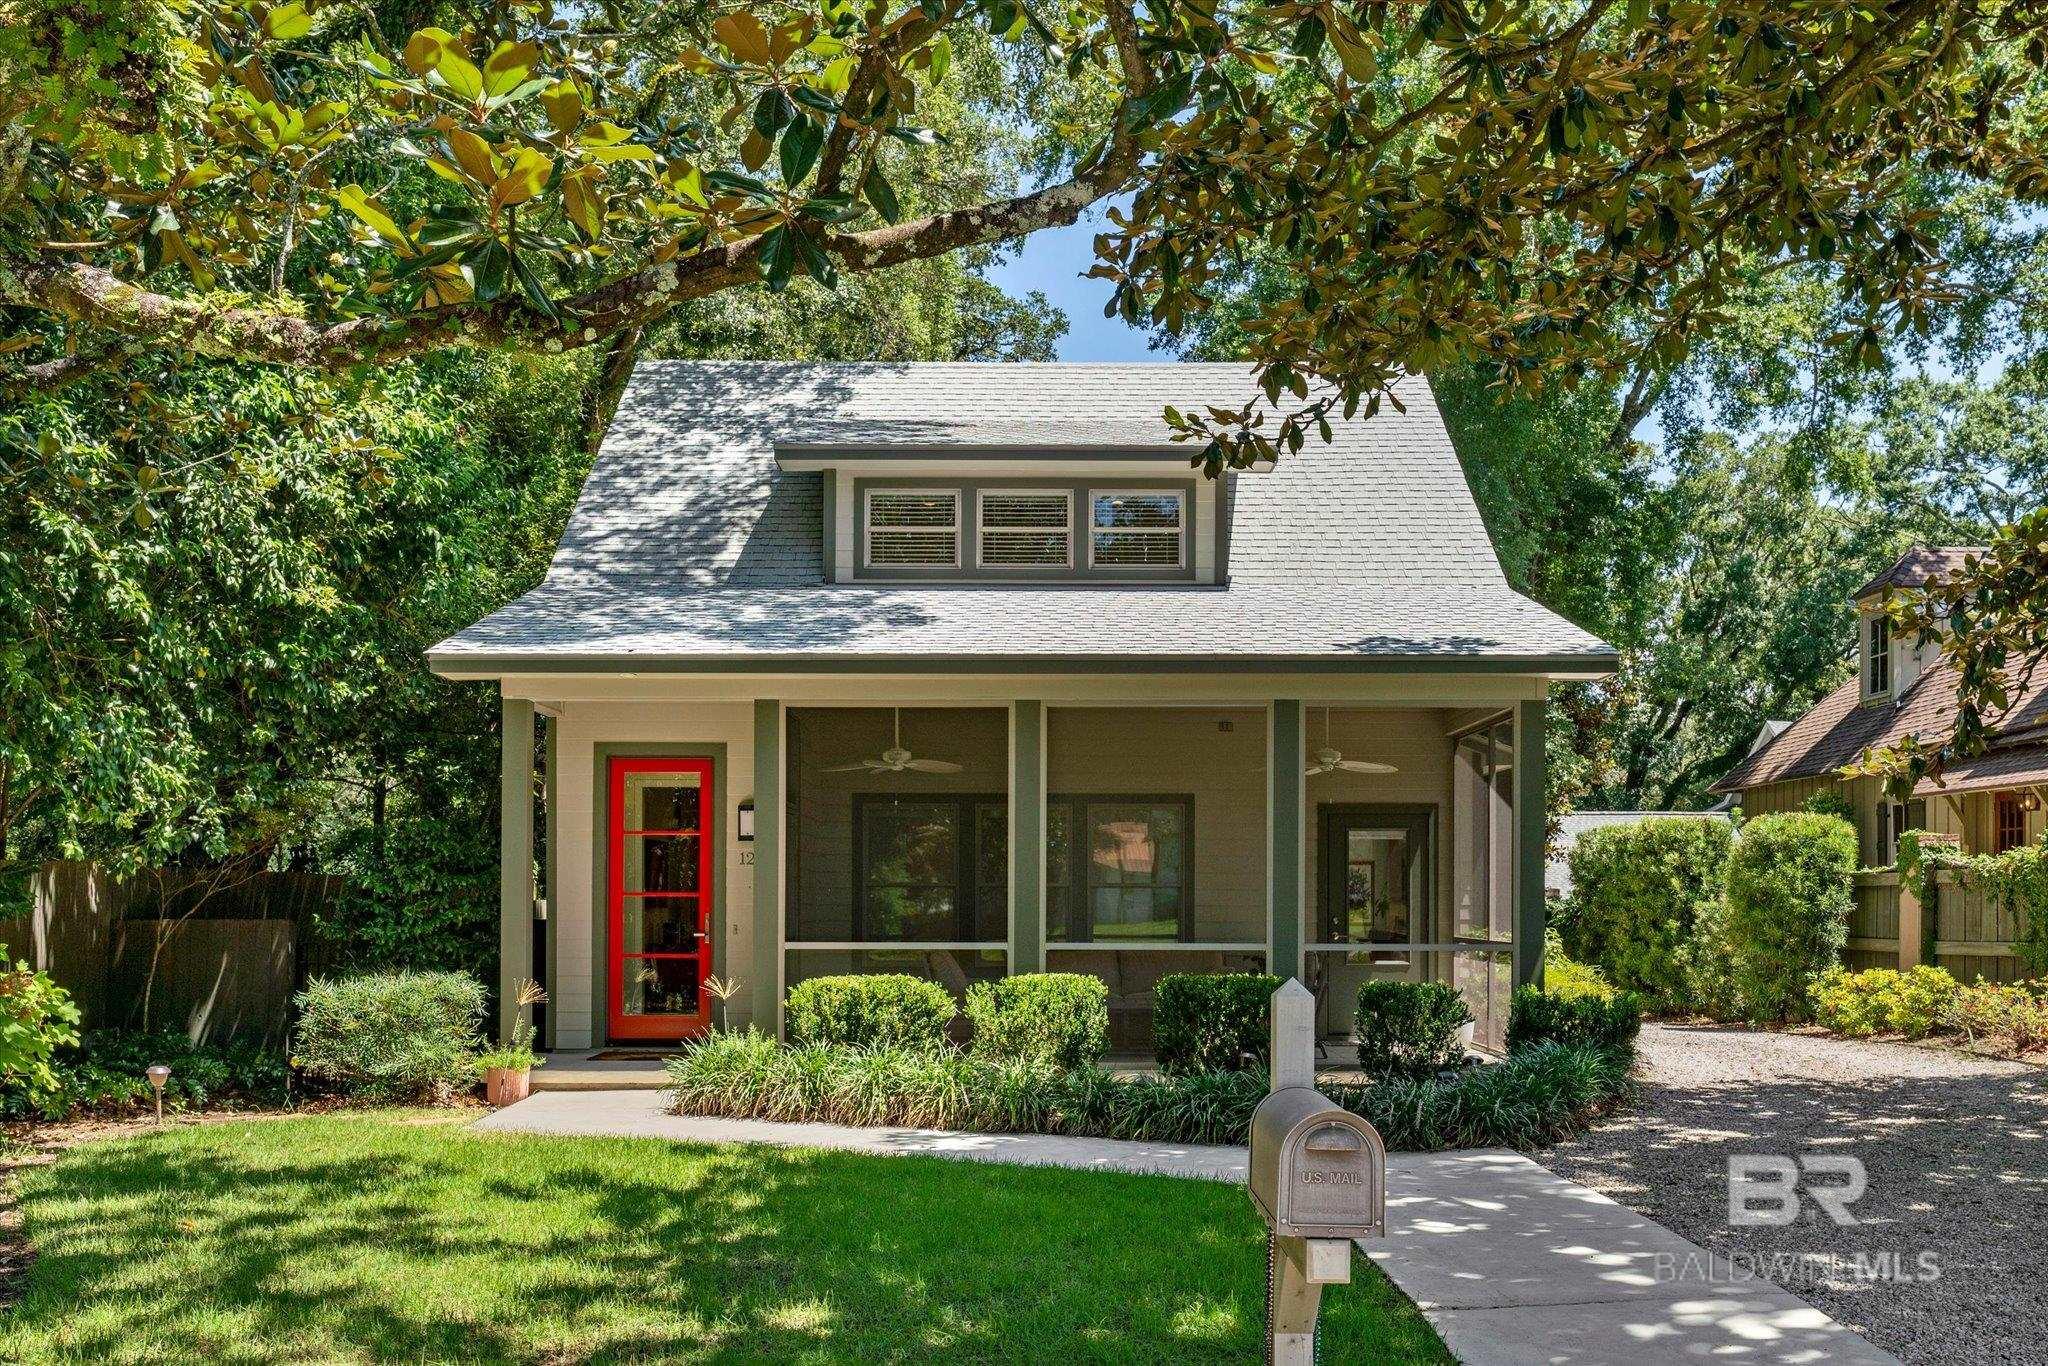 Over 2,500 square feet of elegance! Just two blocks from Downtown Fairhope and two blocks from the bay, this beautiful home is within walking distance of everything you need in the Downtown Fairhope area! 3 bedrooms, 3.5 bathrooms including the garage apartment, and a loft in the main house that could easily be used as a 4th bedroom. Schedule your showing NOW before it's gone! *Buyer/buyers agent to verify all information deemed important*